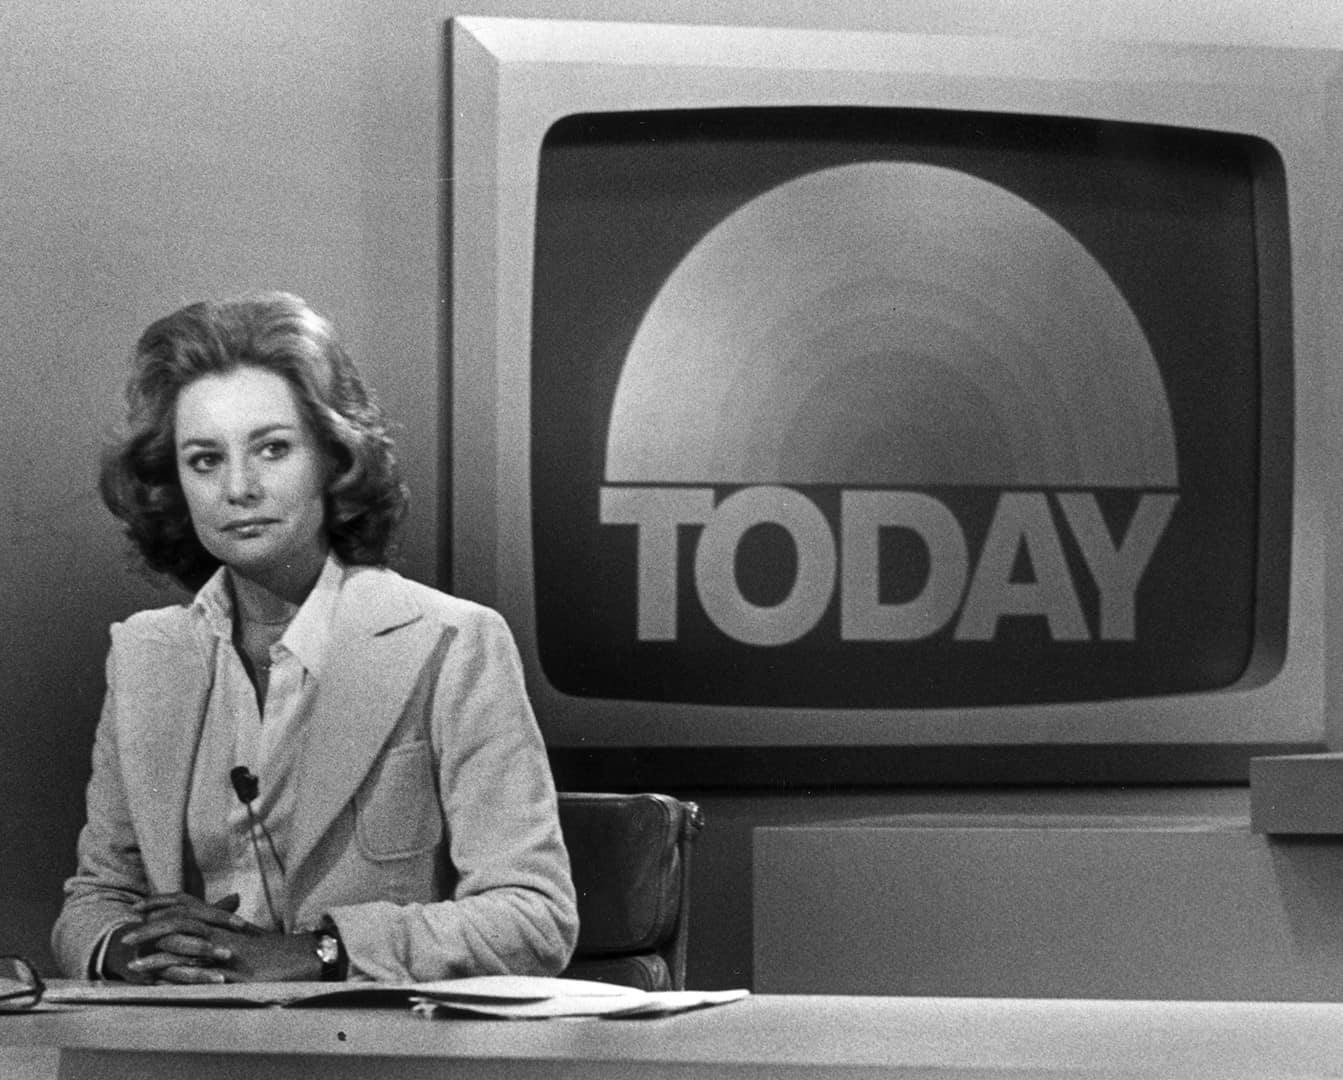 Barbara Walters joined NBC's "The Today Show" in 1961